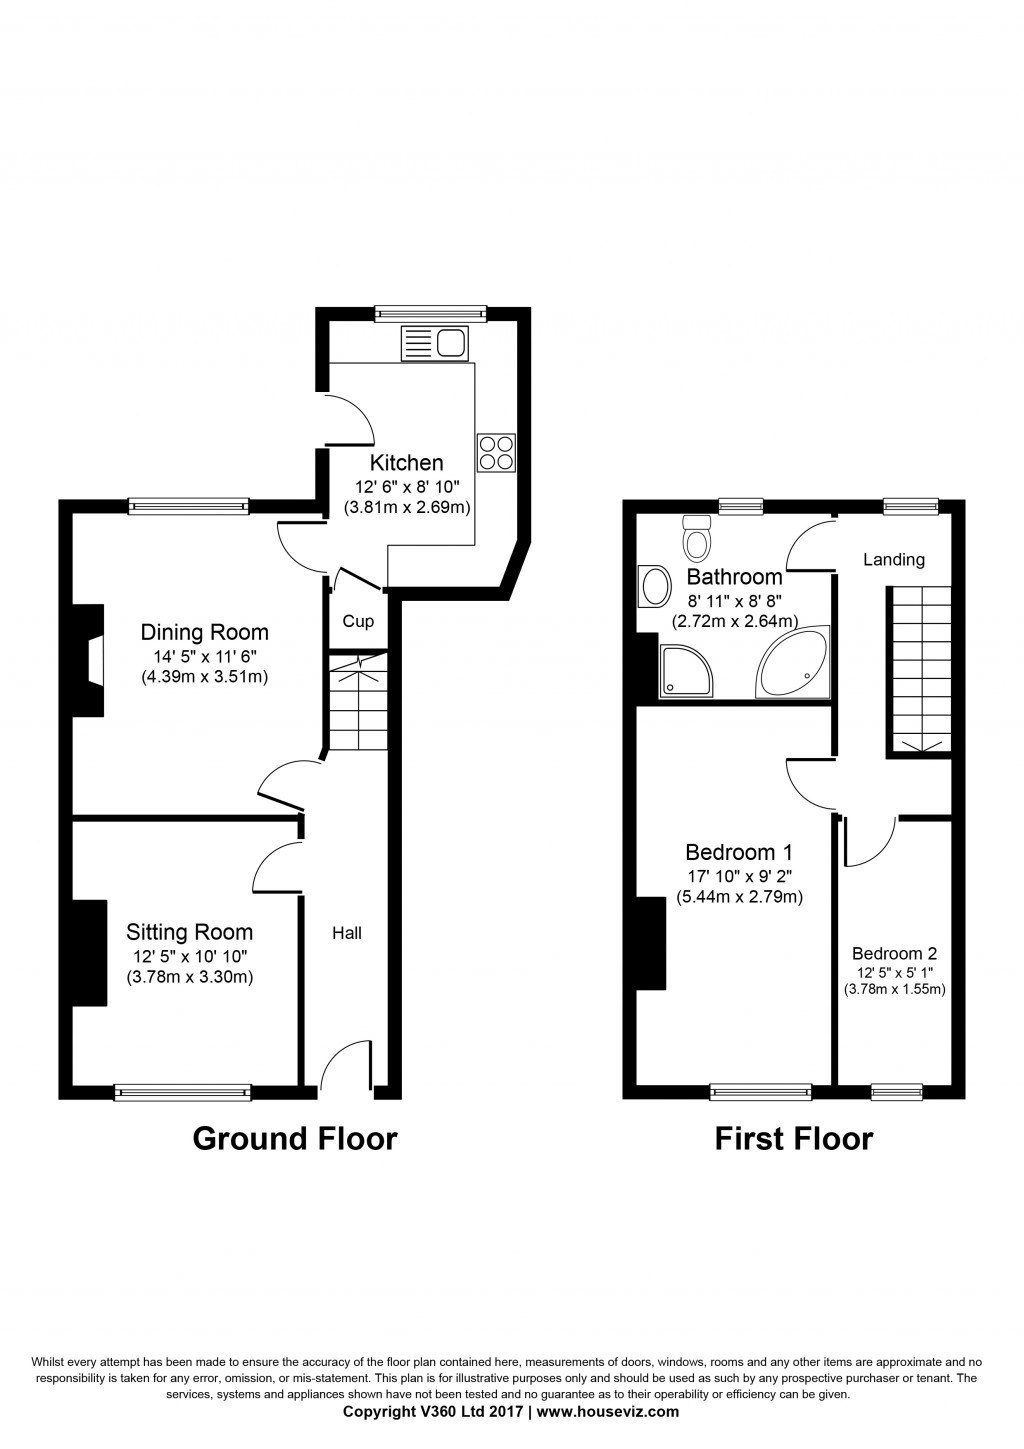 Floorplans For Lane Ends, Cowling